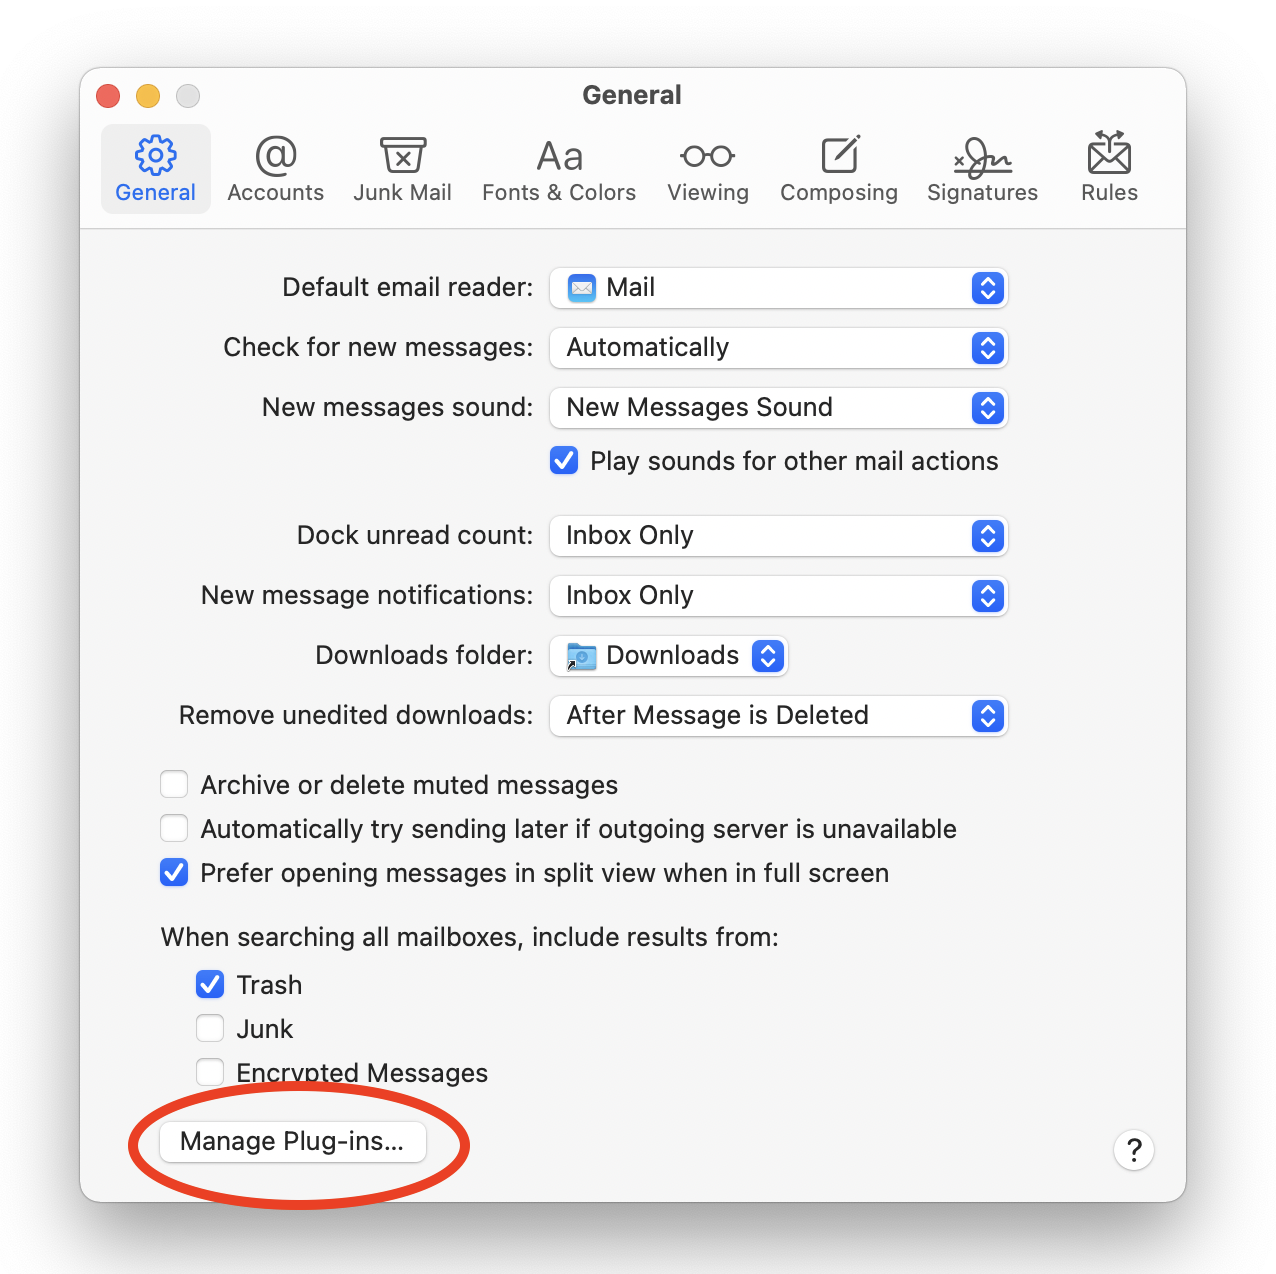 What can I do if the Manage Plugins button is gone from Apple Mail?